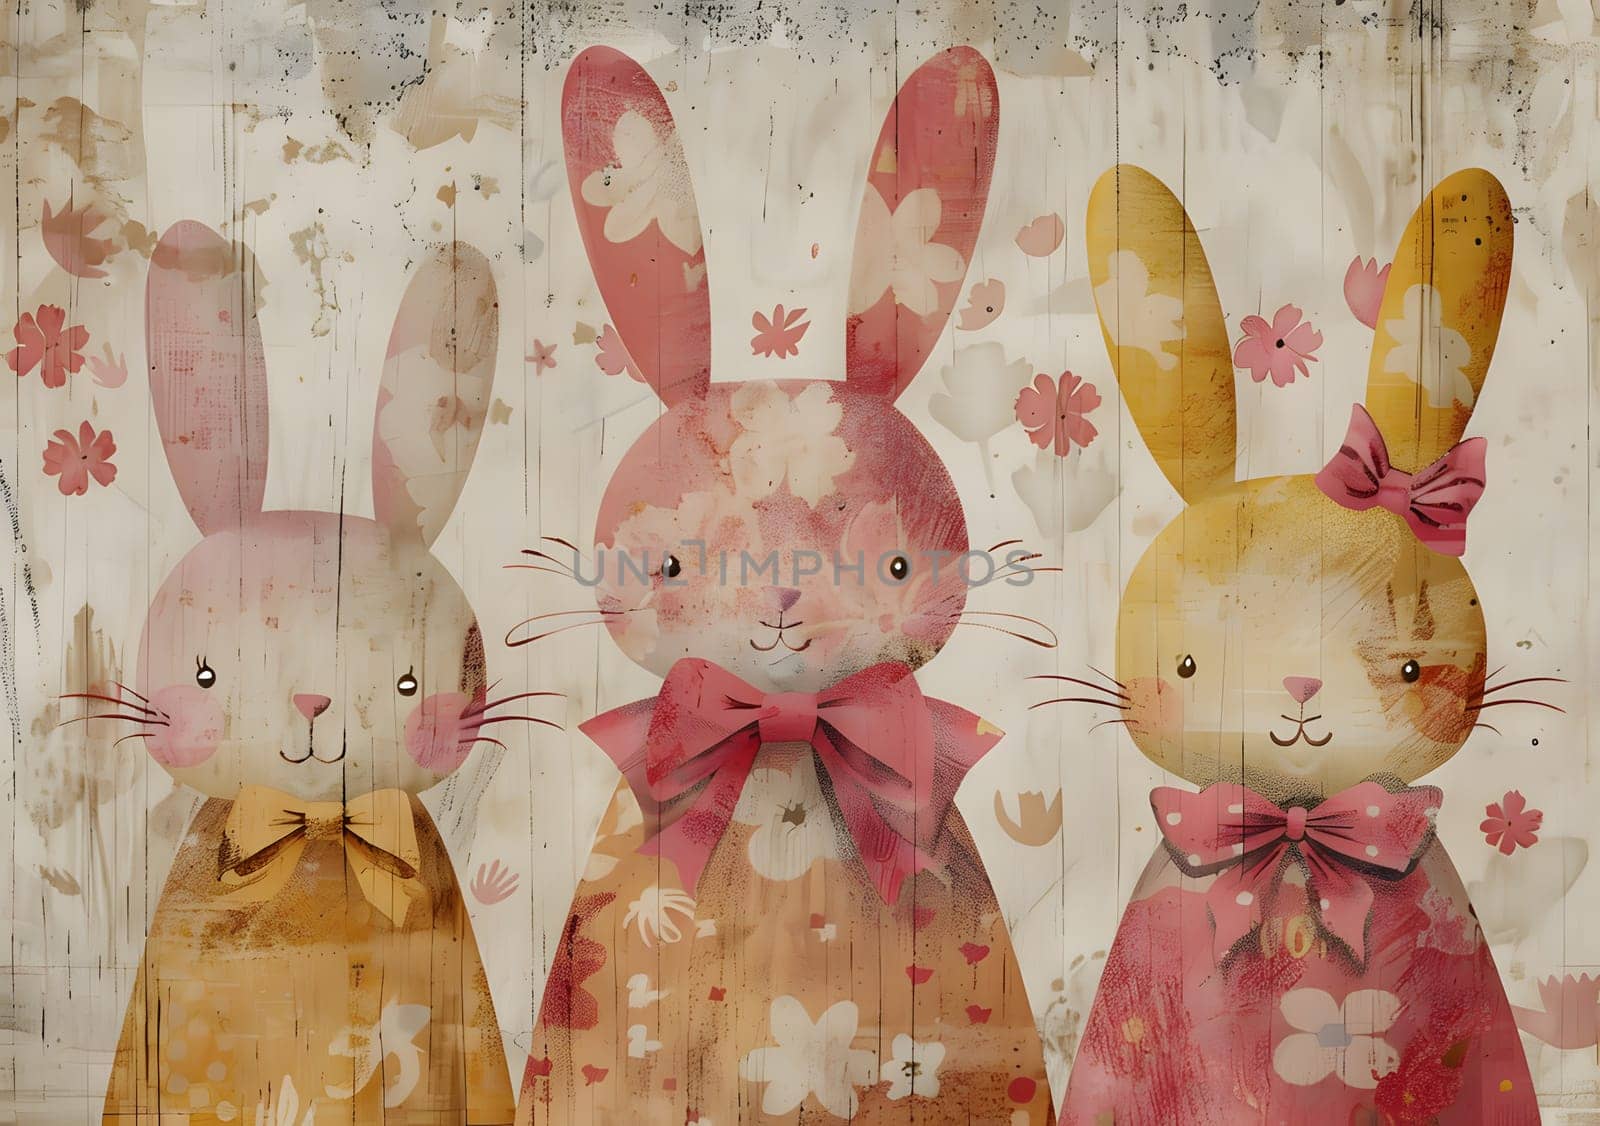 Three rabbits with bows on their heads in pink, fawn, and magenta standing next to each other. This creative arts display features a unique pattern showcasing rabbits and hares